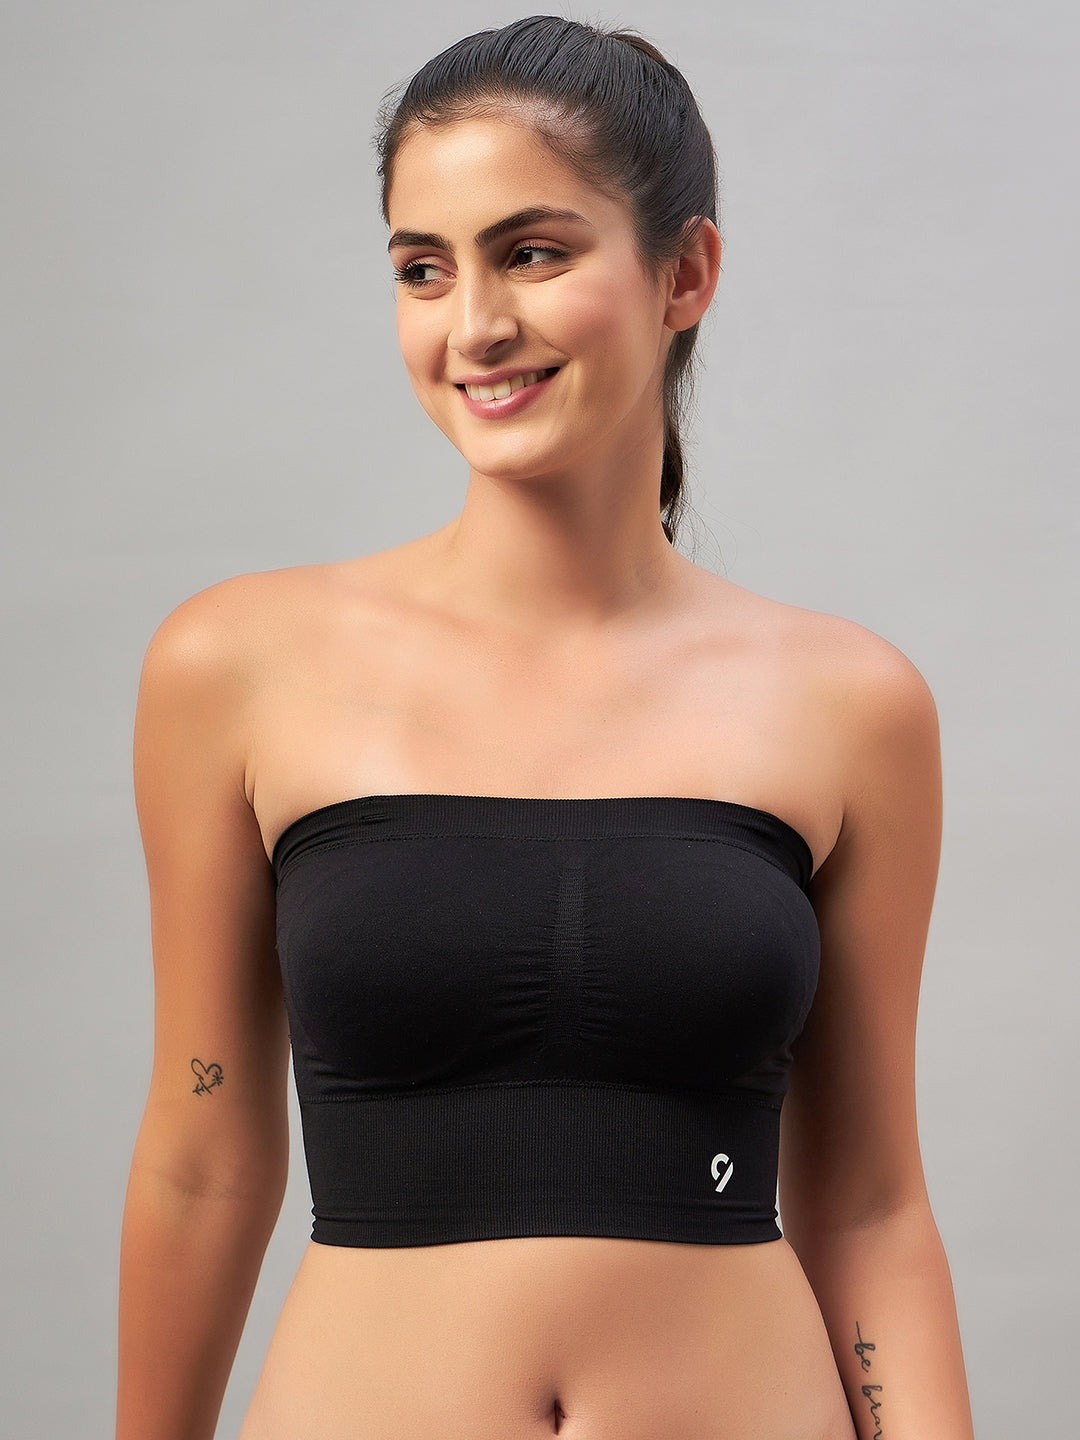 Buy C9 AIRWEAR Pack Of 2 Navy Blue Solid Non Wired Non Padded Bandeau Bras  - Bra for Women 10927756